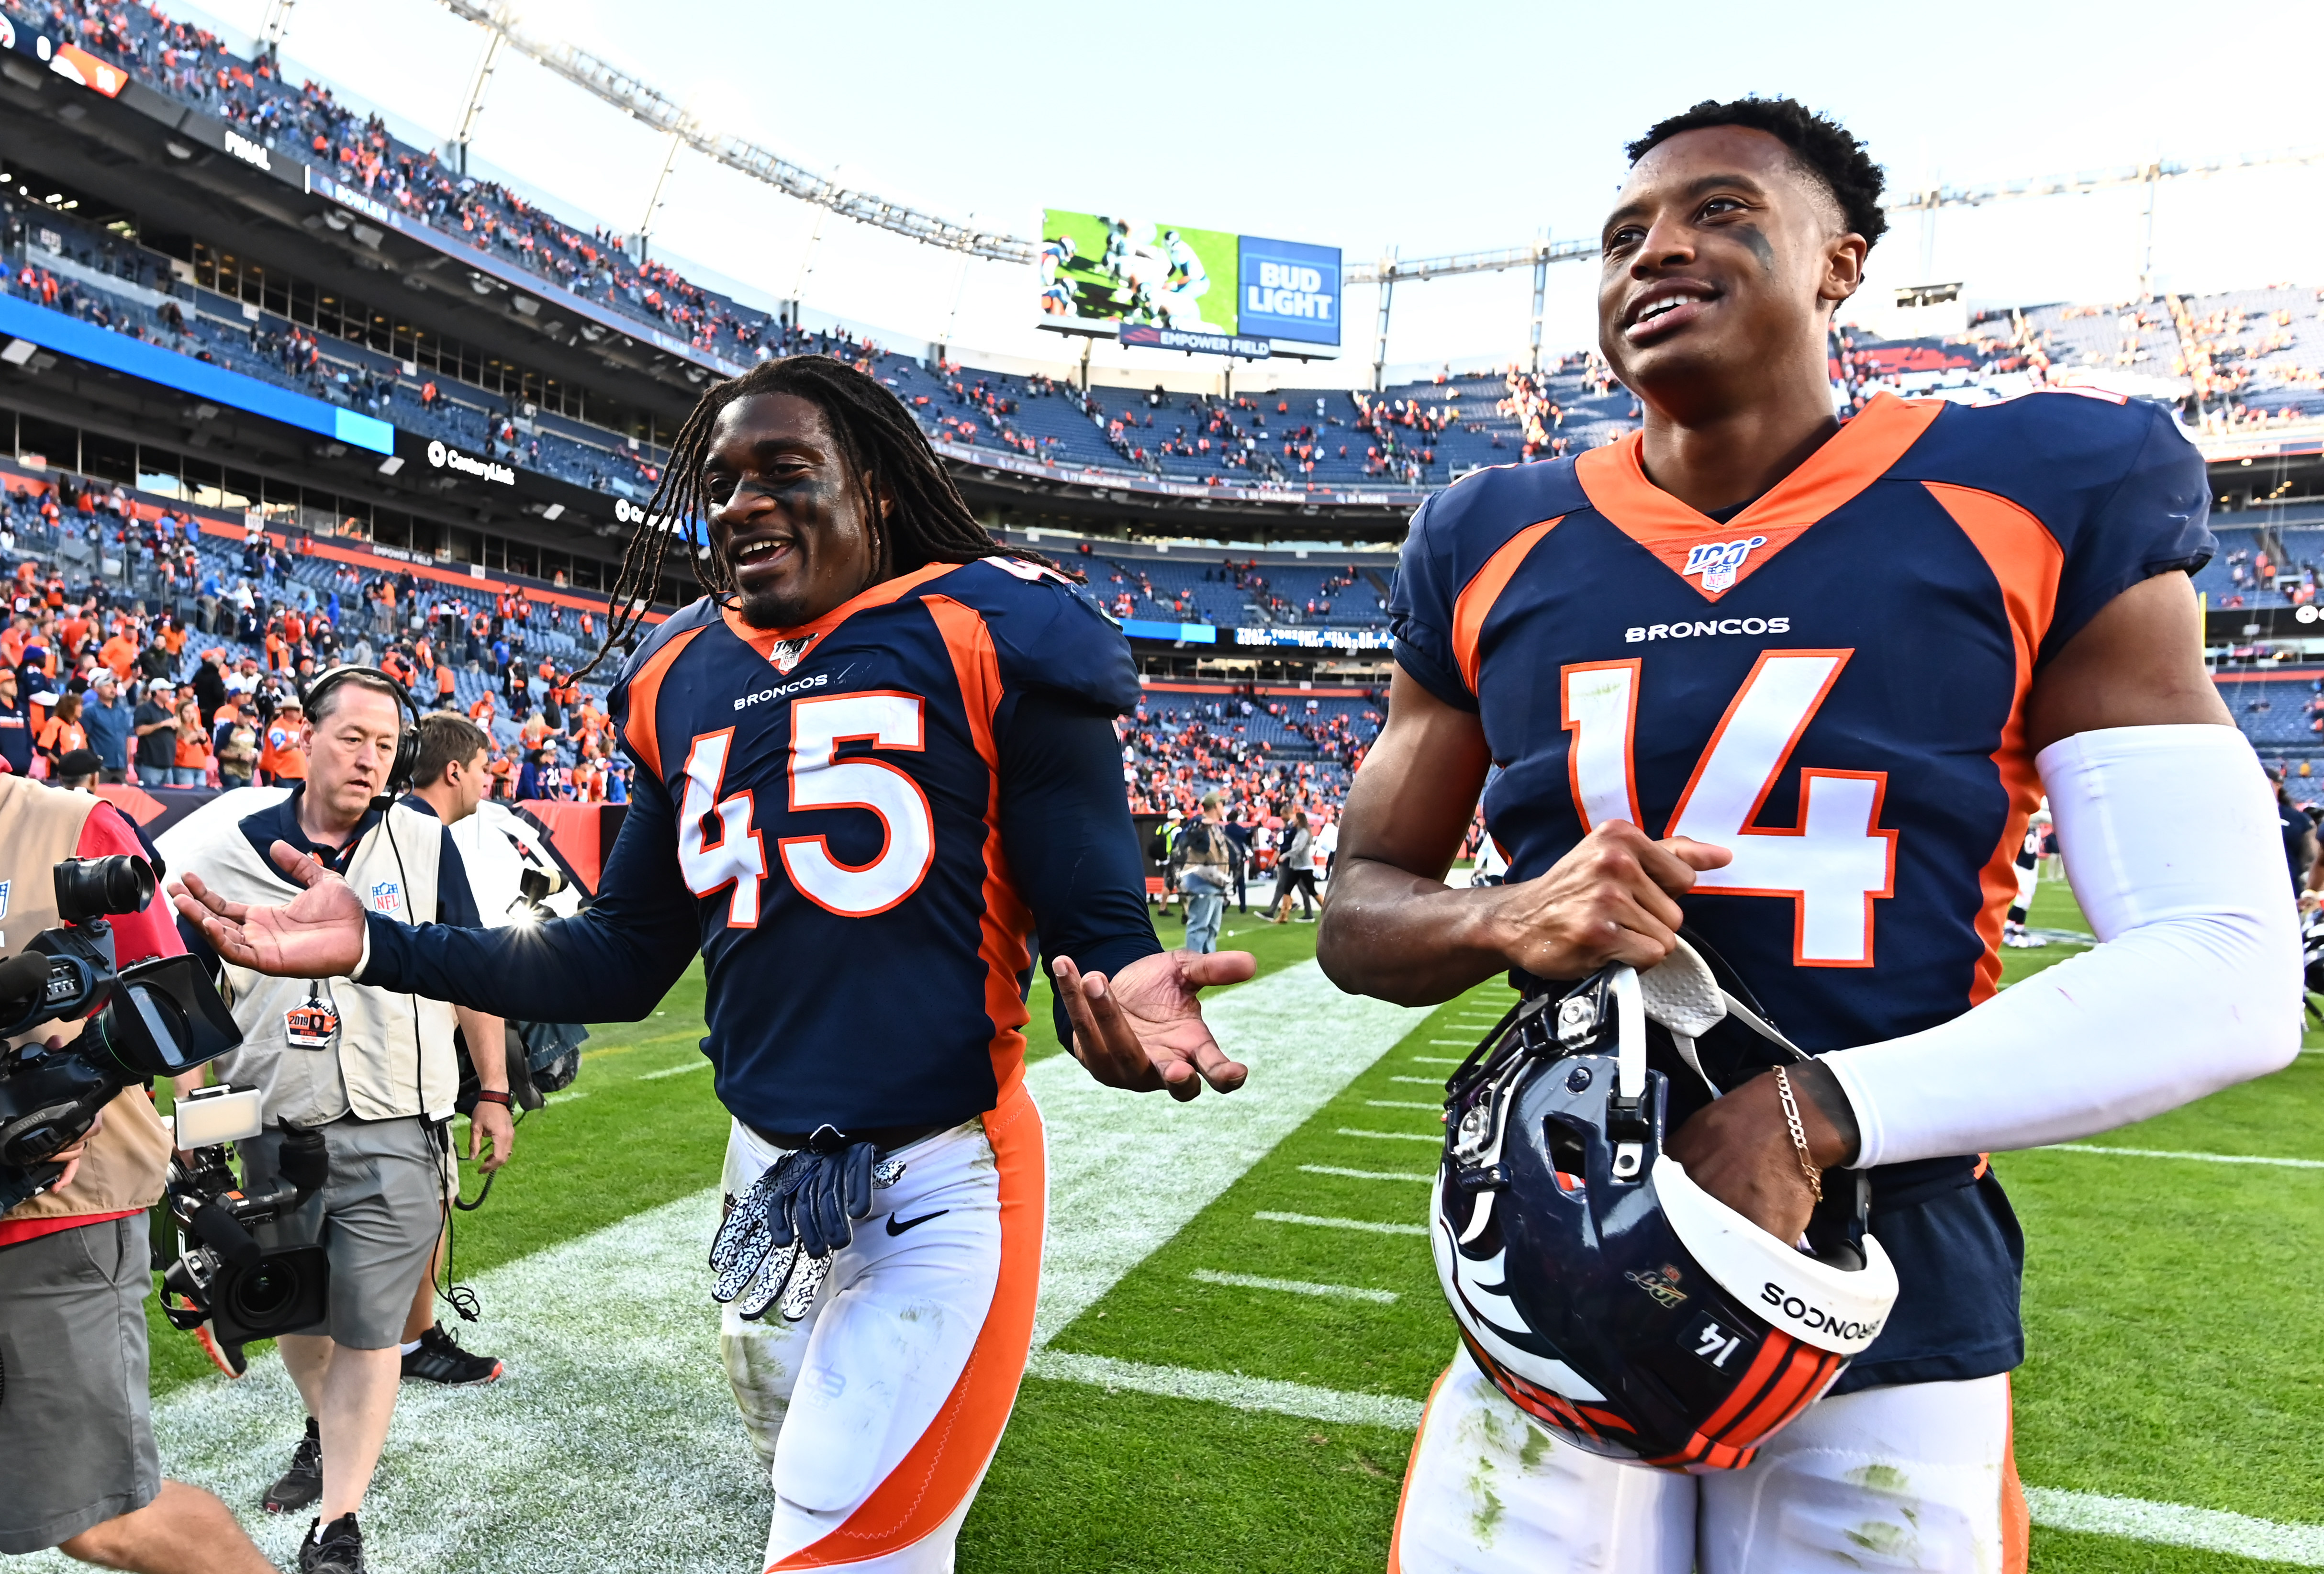 Denver Broncos linebacker Alexander Johnson (45) and wide receiver Courtland Sutton (14) following the win over the Tennessee Titans the at Empower Field at Mile High.